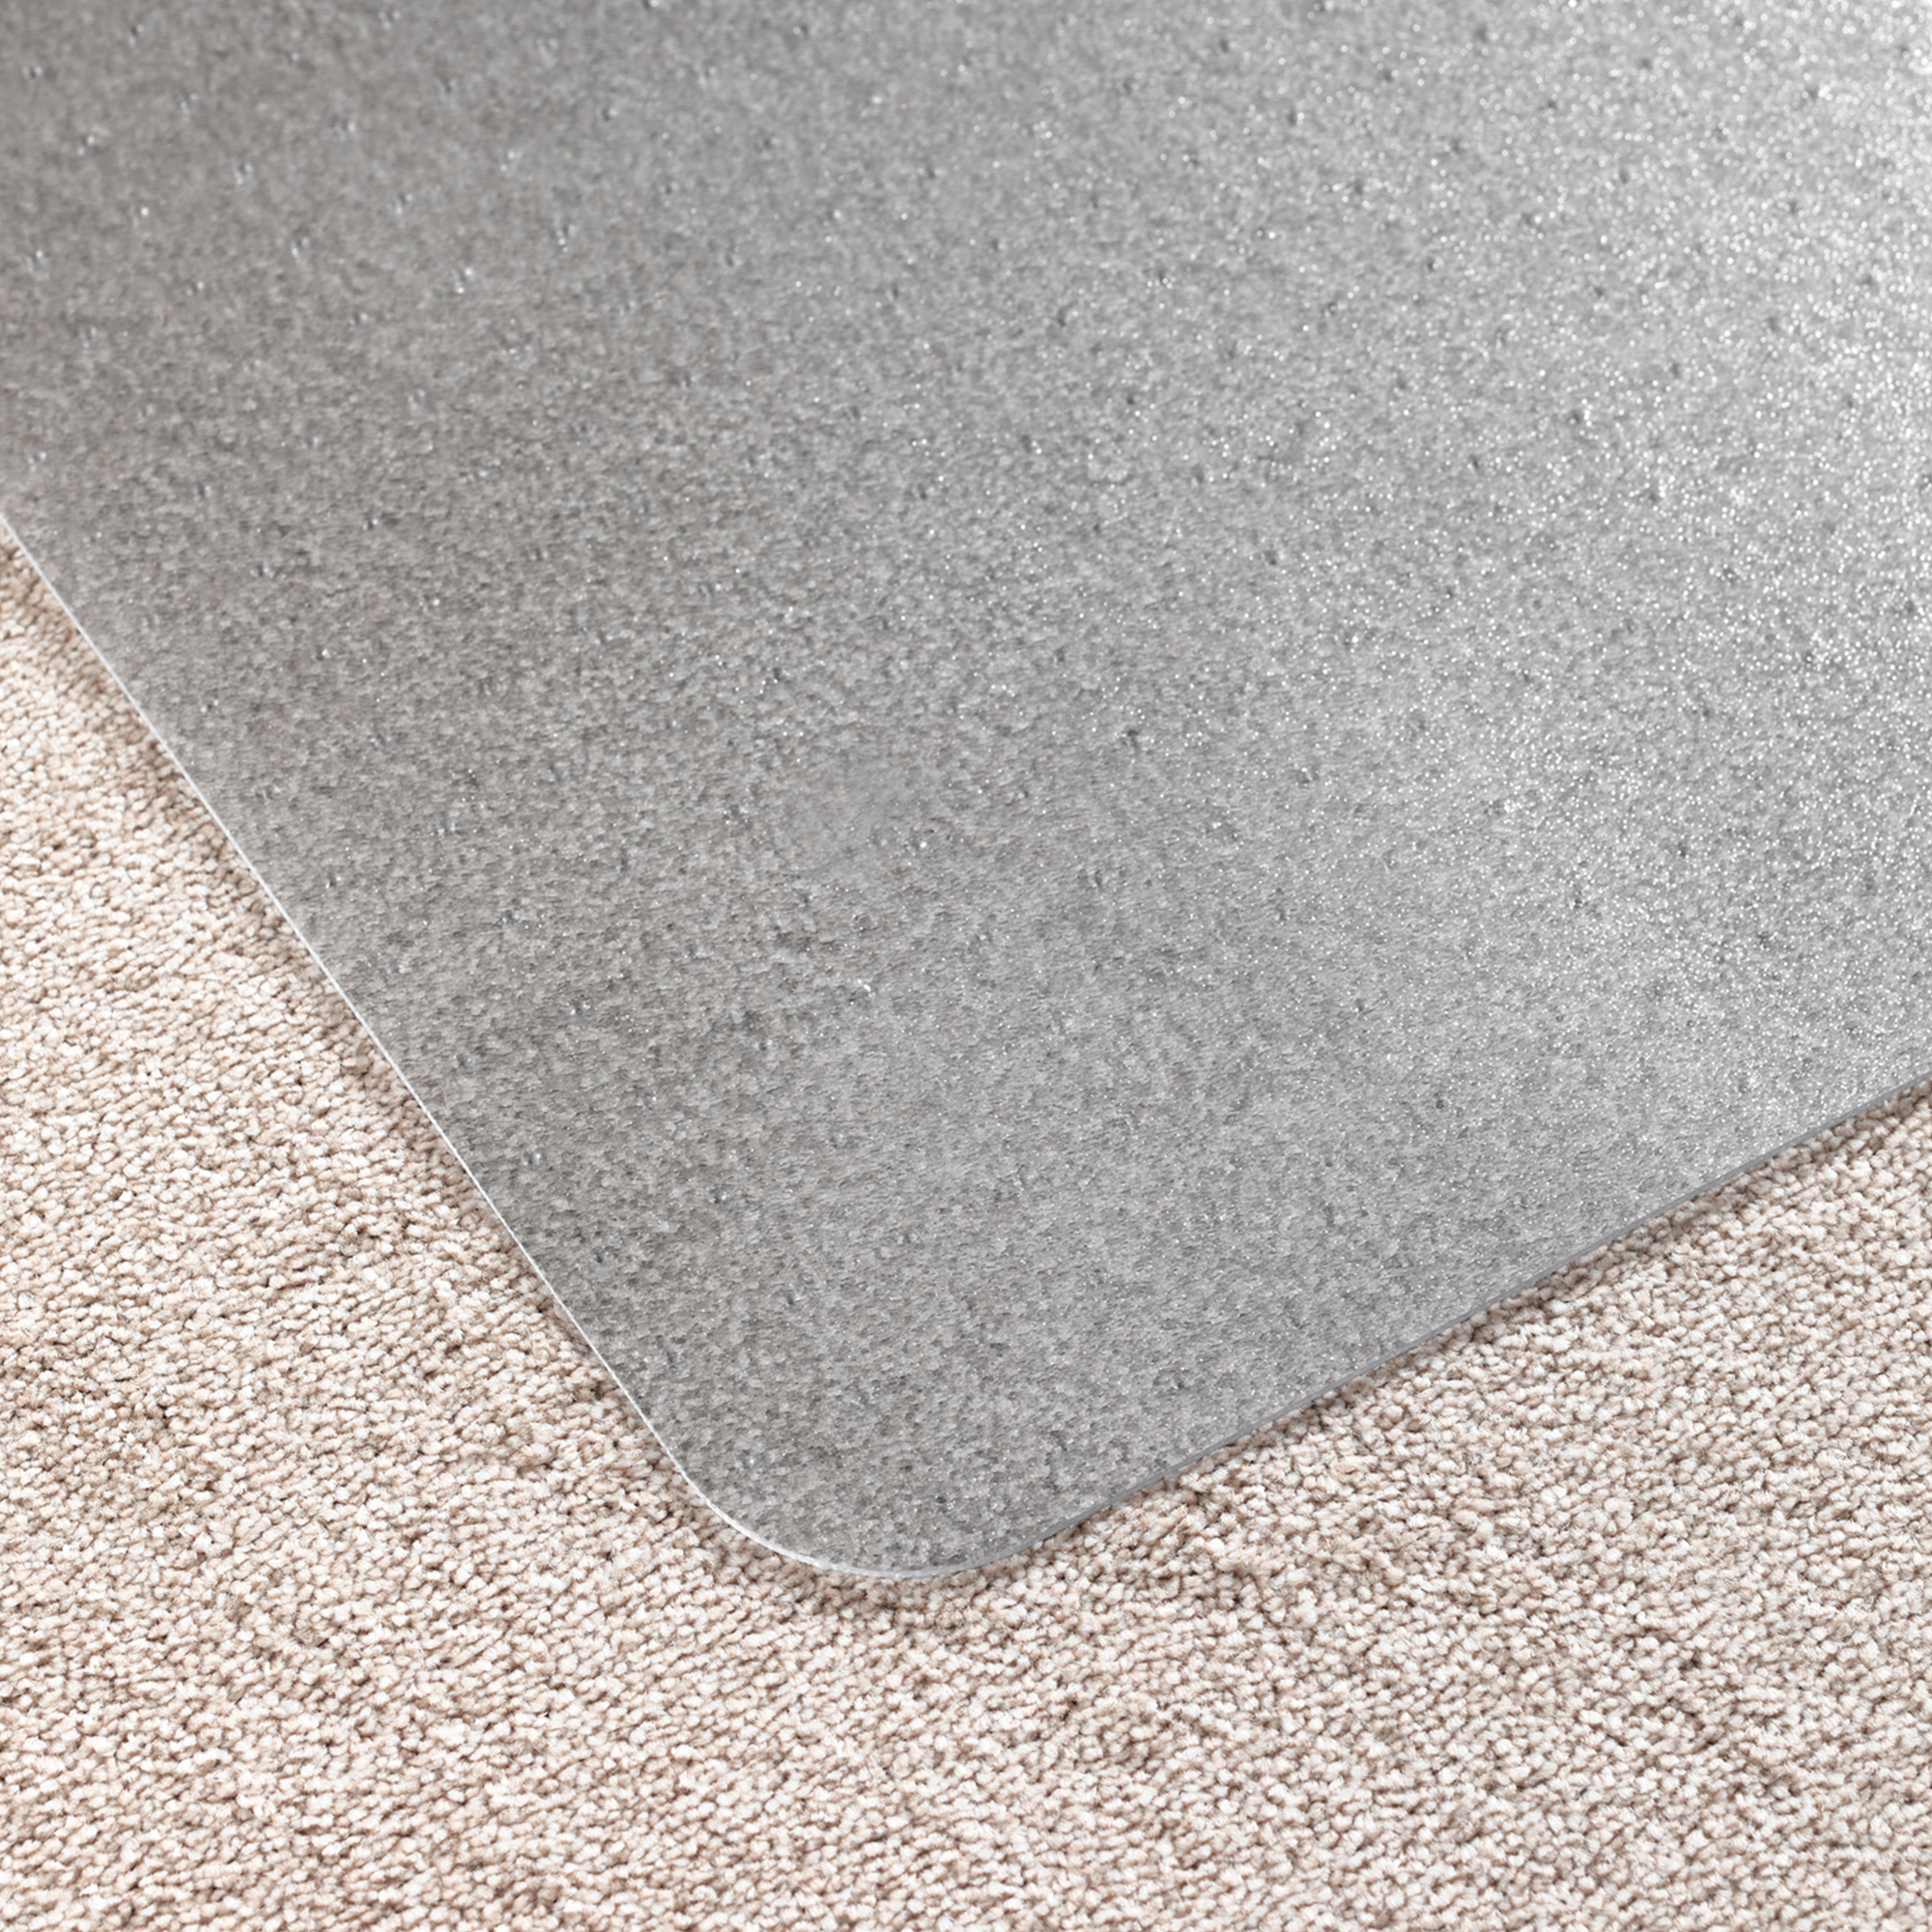 Computex® Anti-Static Vinyl Lipped Chair Mat for Carpets up to 3/8" - 36" x 48" - image 5 of 11